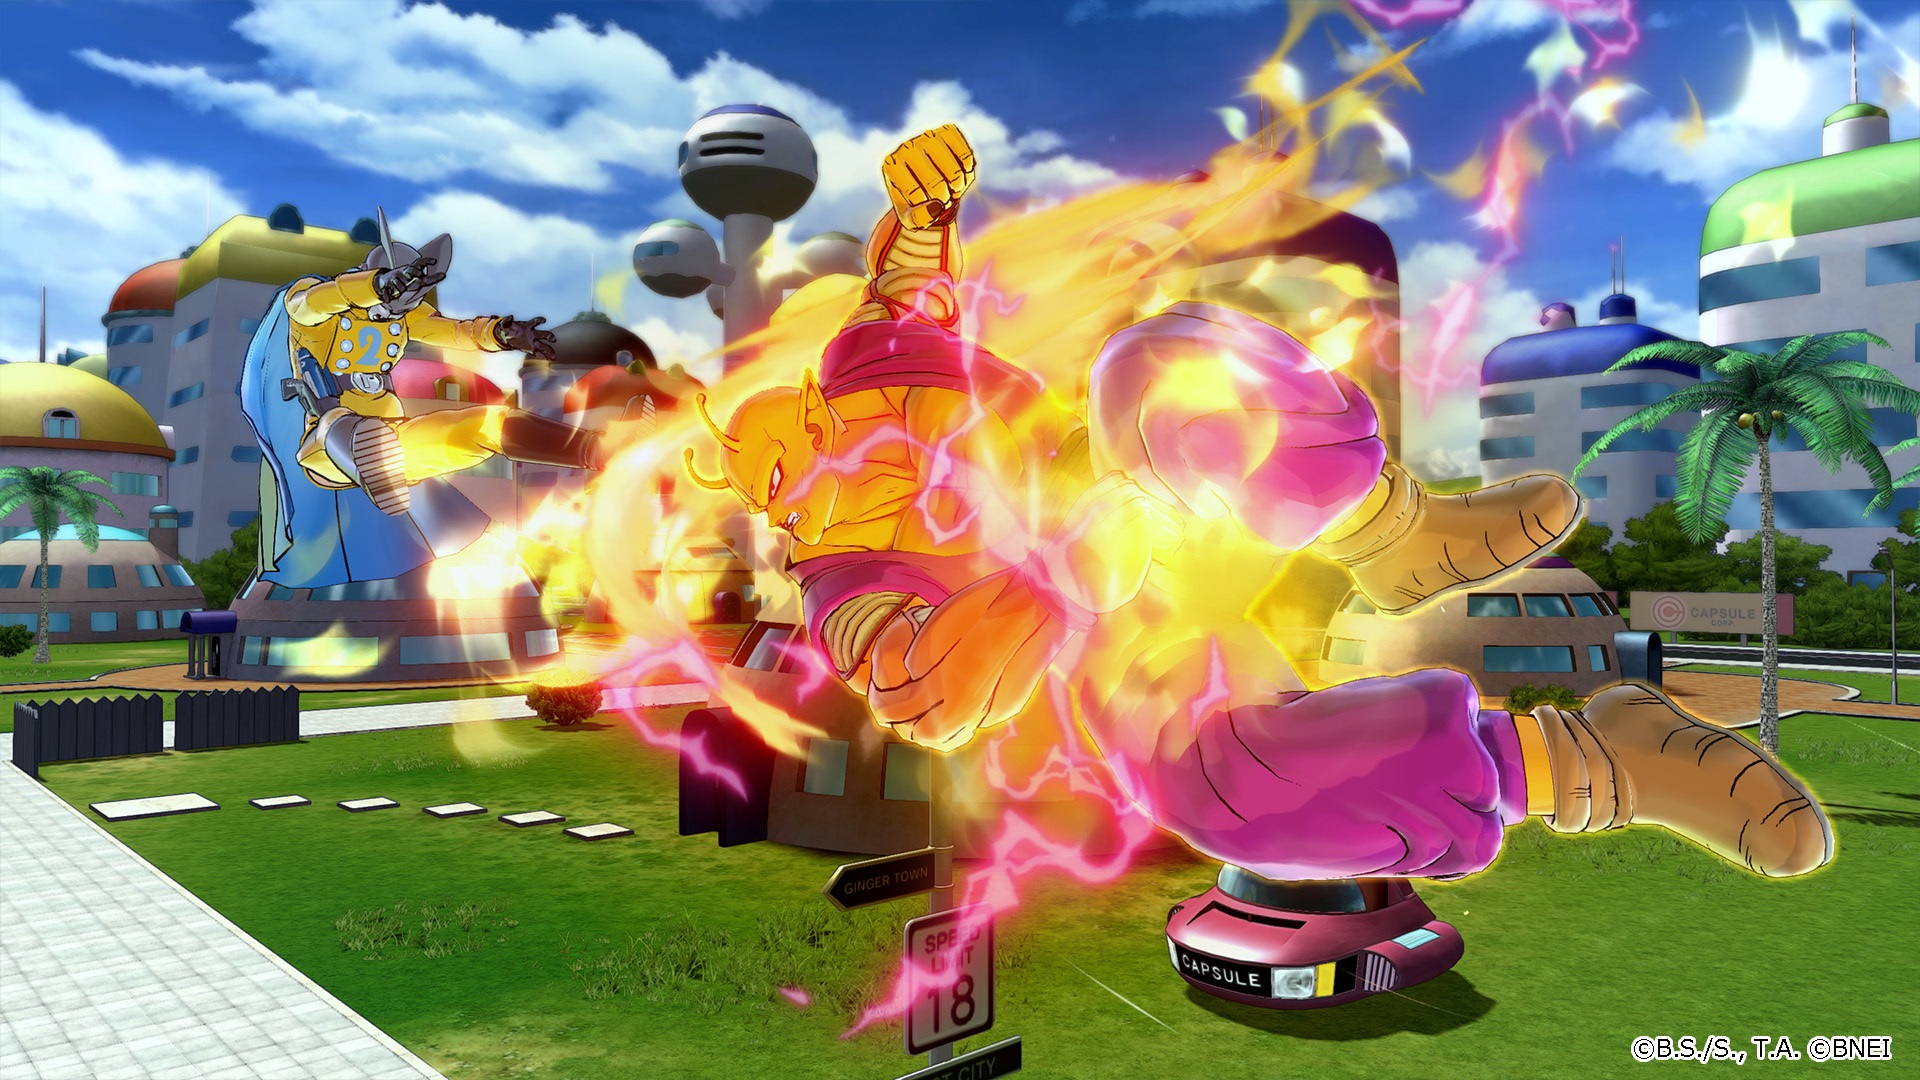 Dragon Ball Xenoverse 2 Game's 2nd 'Hero of Justice' DLC Pack to Include  Orange Piccolo - News - Anime News Network